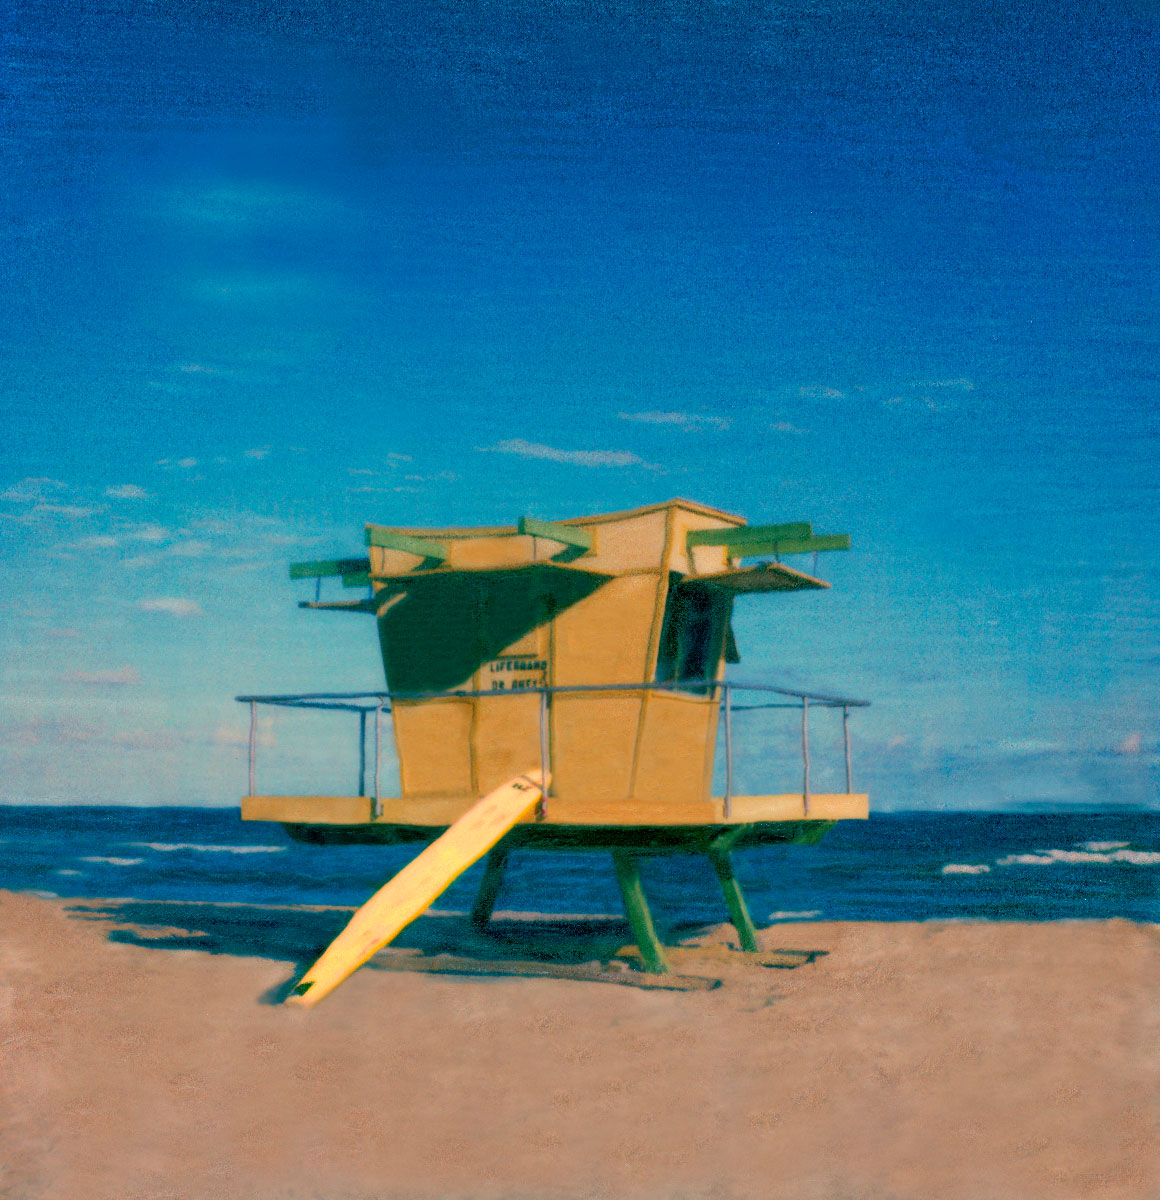 "Miami Beach Lifeguard Stand #1" with Surfboard